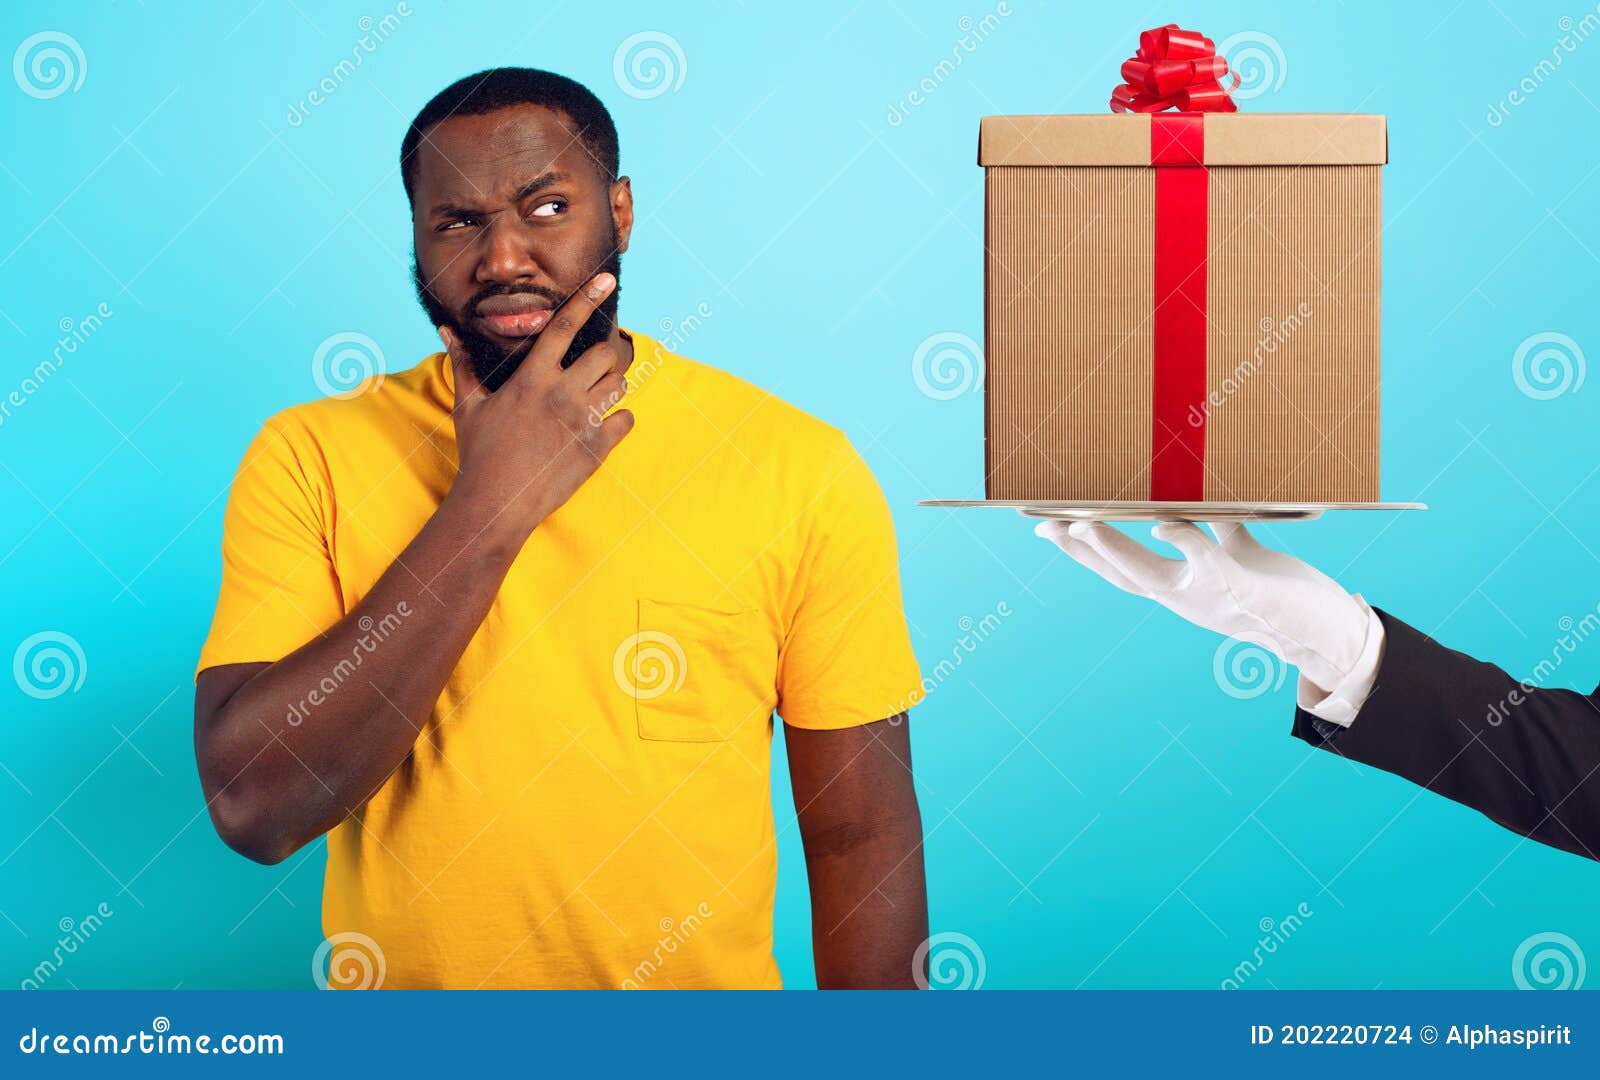 confused man is suspicious about a gift. concept of options, confusion, indecision